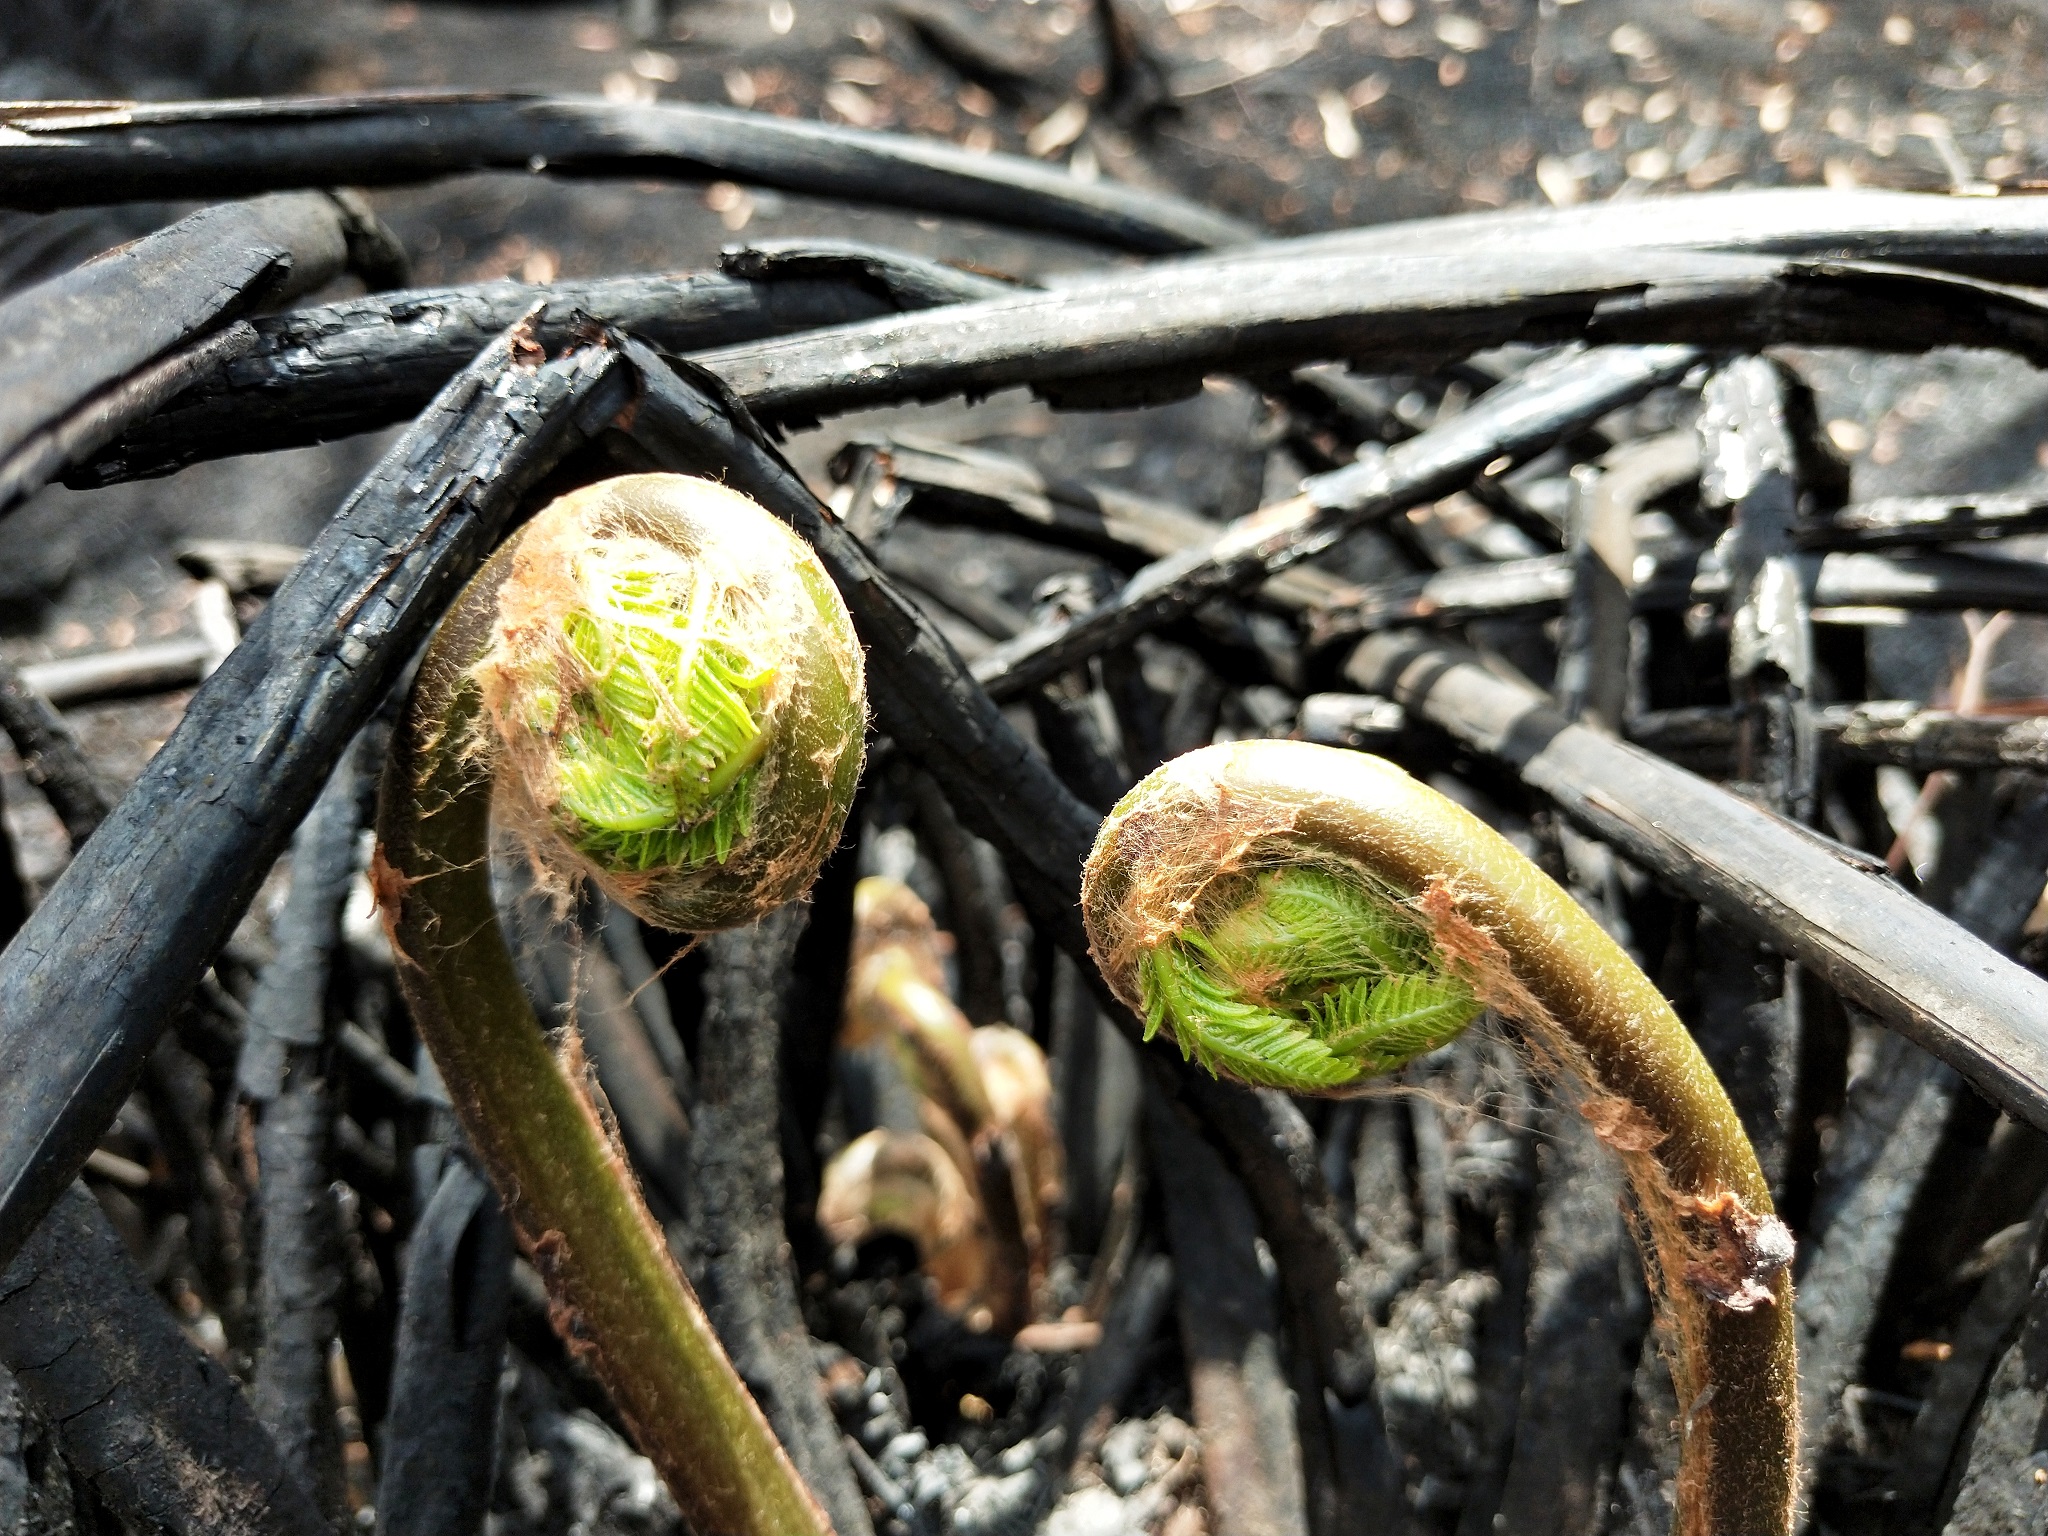 An example of resprouting. Many ferns send up new fronds shortly after the January 2020 bushfires at Wingello, NSW. Picture: Casey Kirchhoff